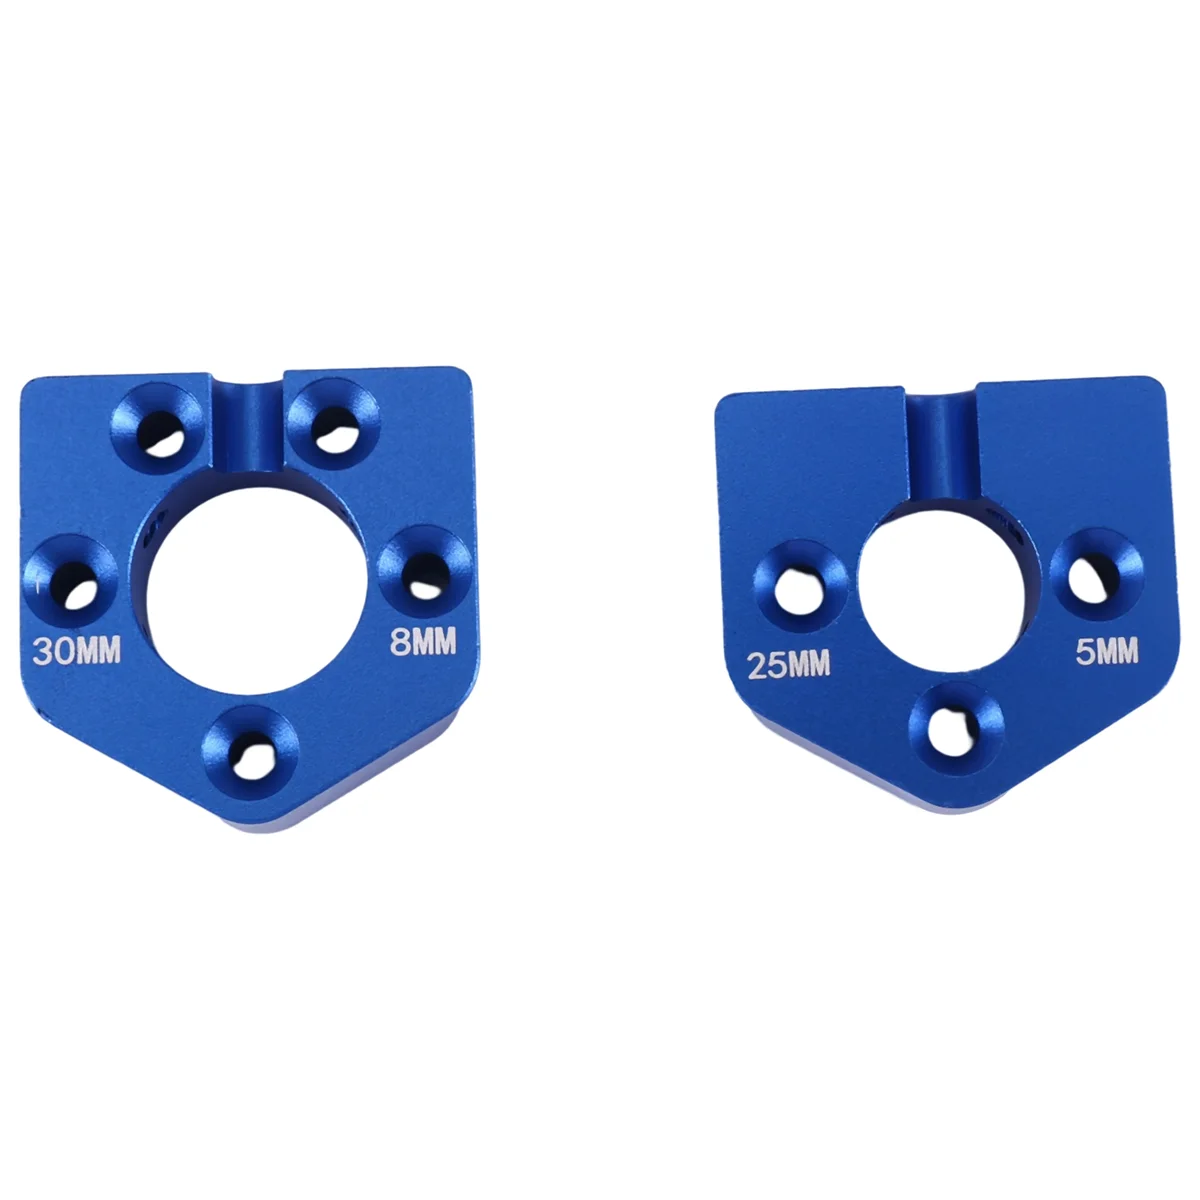 

Metal Upgraded Motor Mount Seat Quick Dis embly for TRAXXAS 1/5 X-Maxx XMAXX 6S 8S 1/6 XRT RC Car Upgrade Parts,2